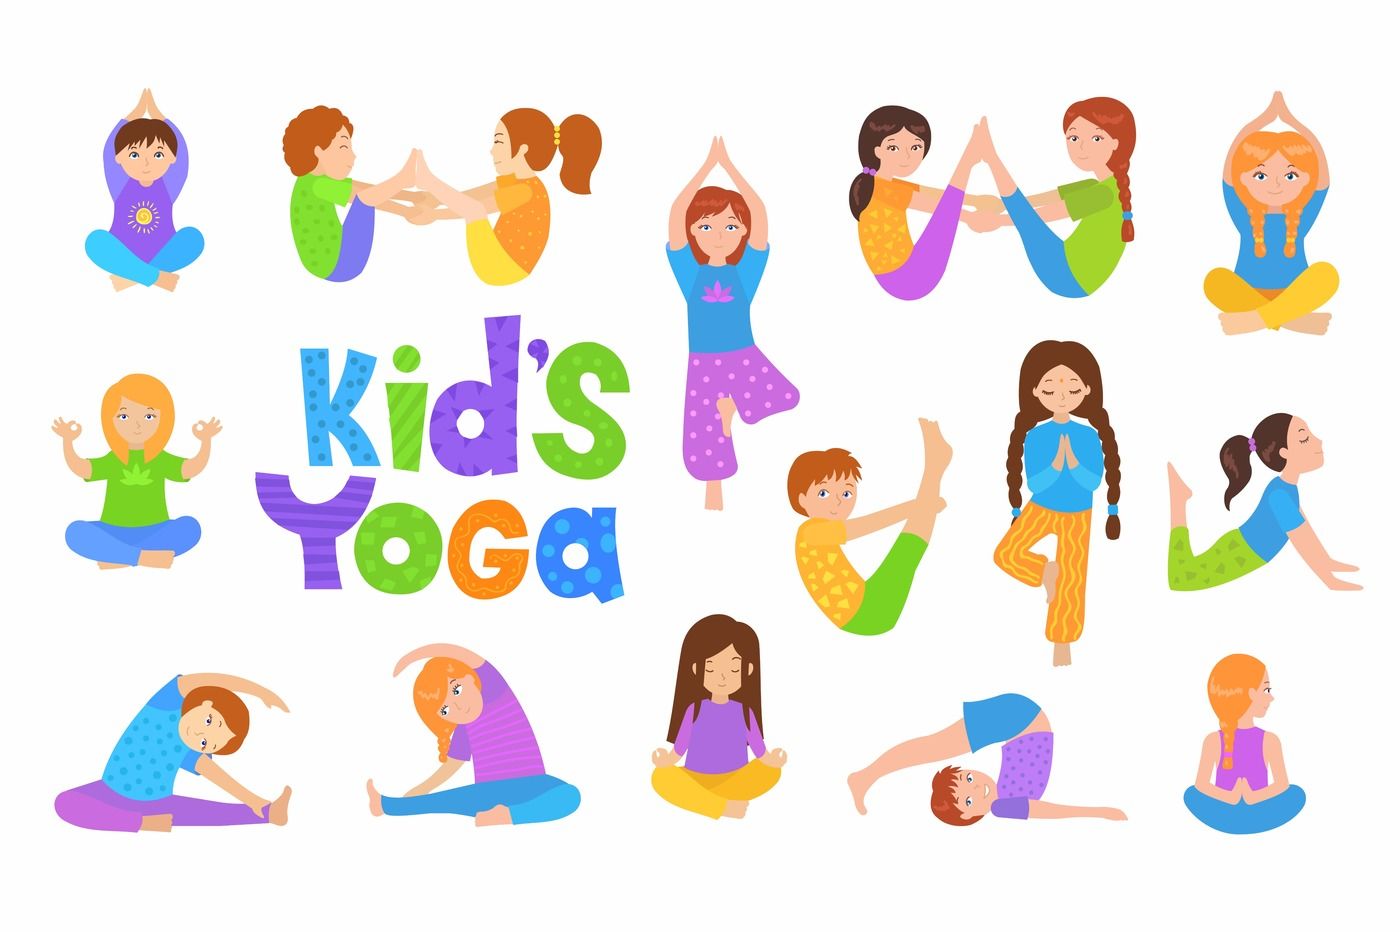 Kids Yoga Poses Vector PNG Images, Kids Yoga Set With Cute Cartoon